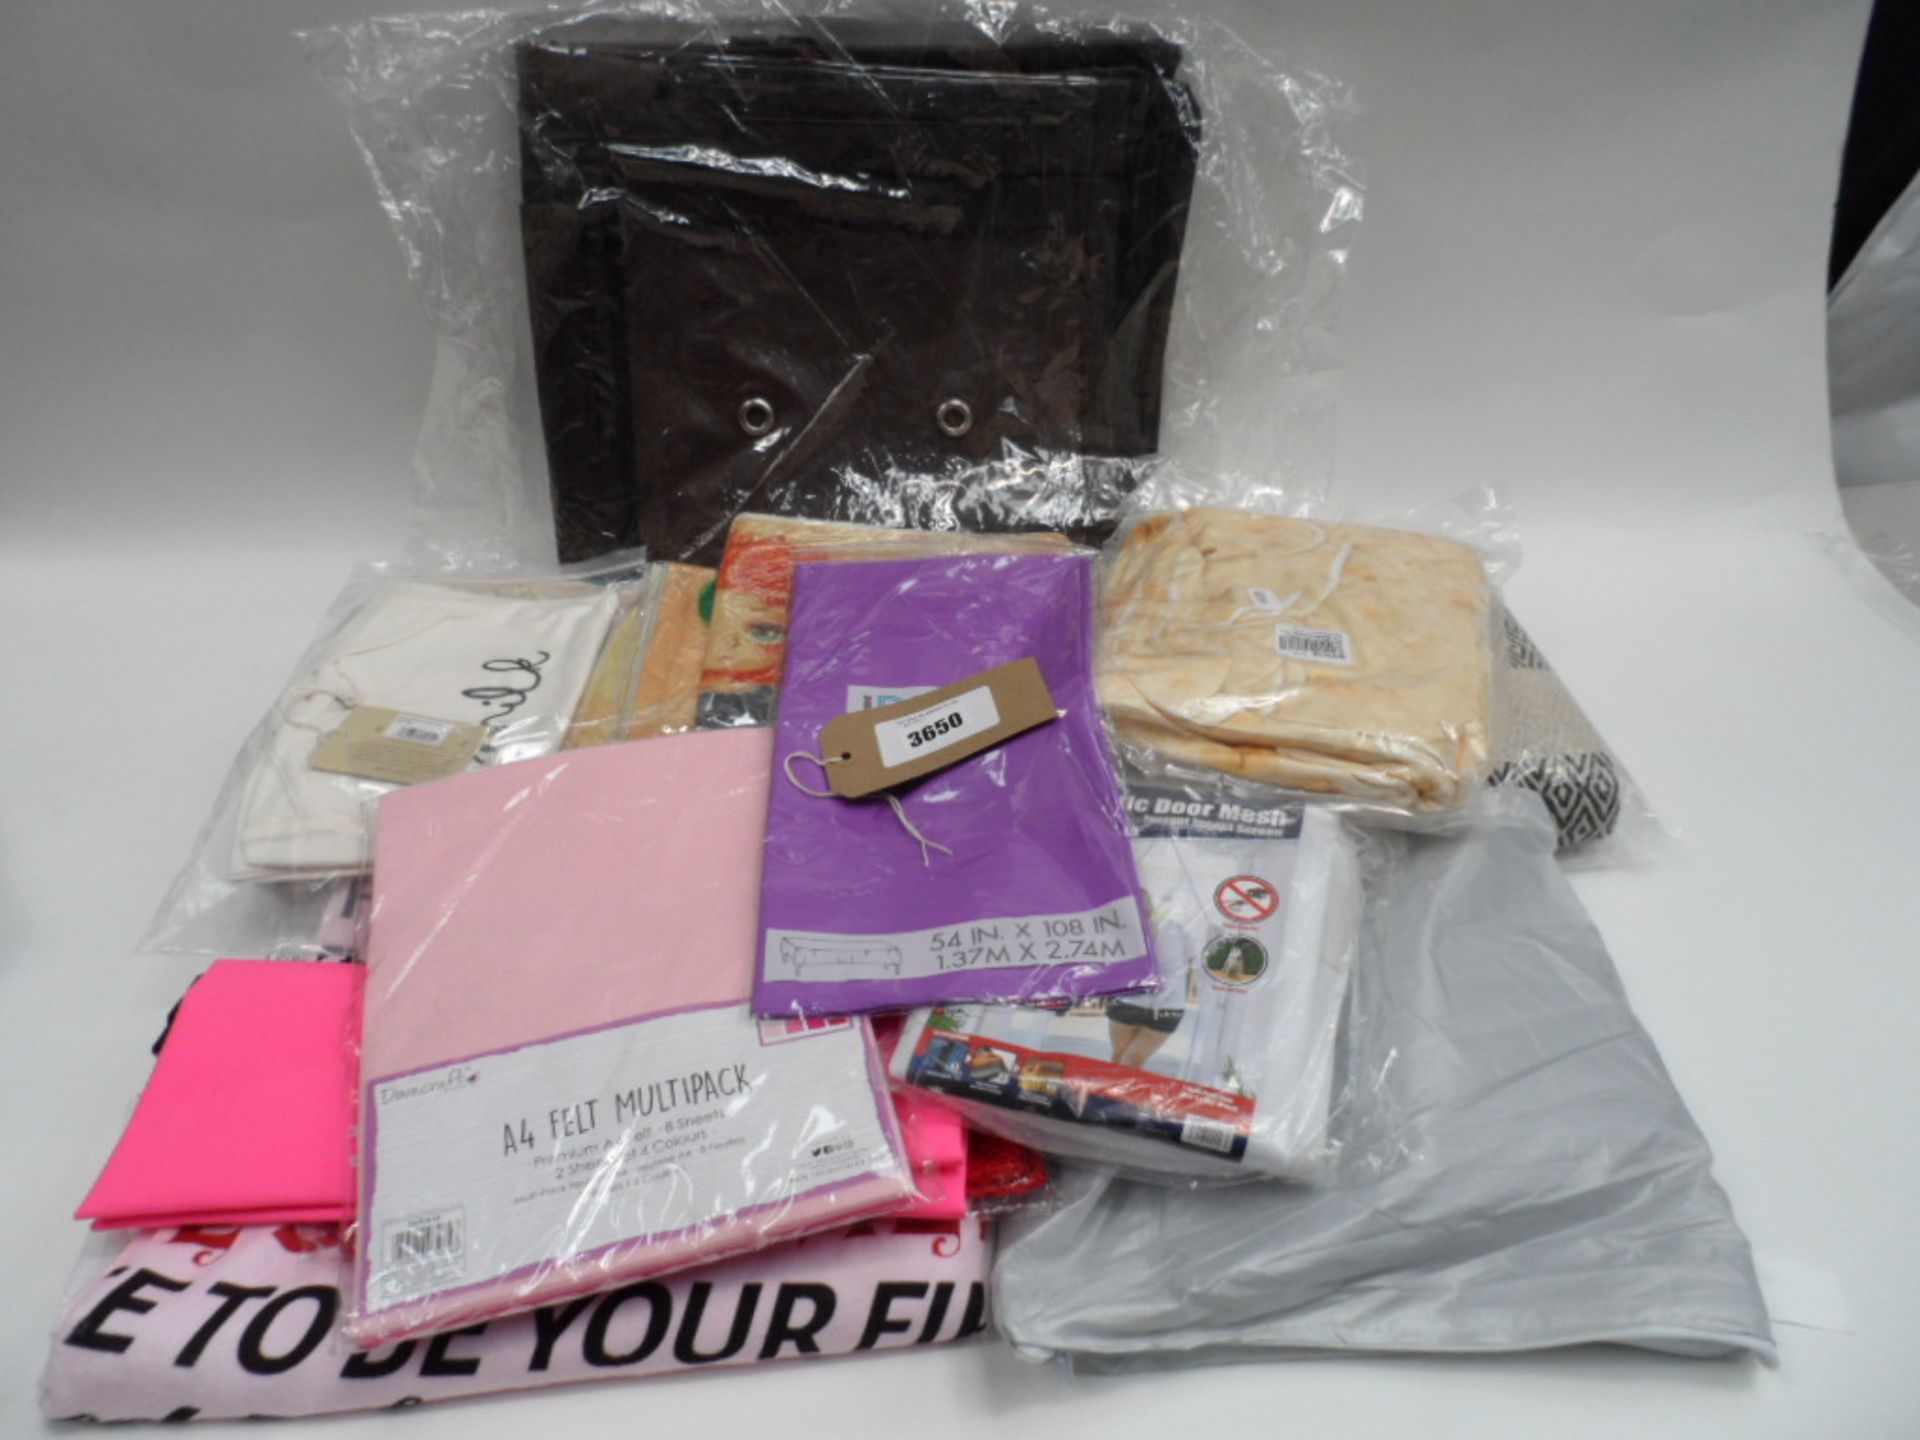 Quantity of various covers, sheets and fabrics